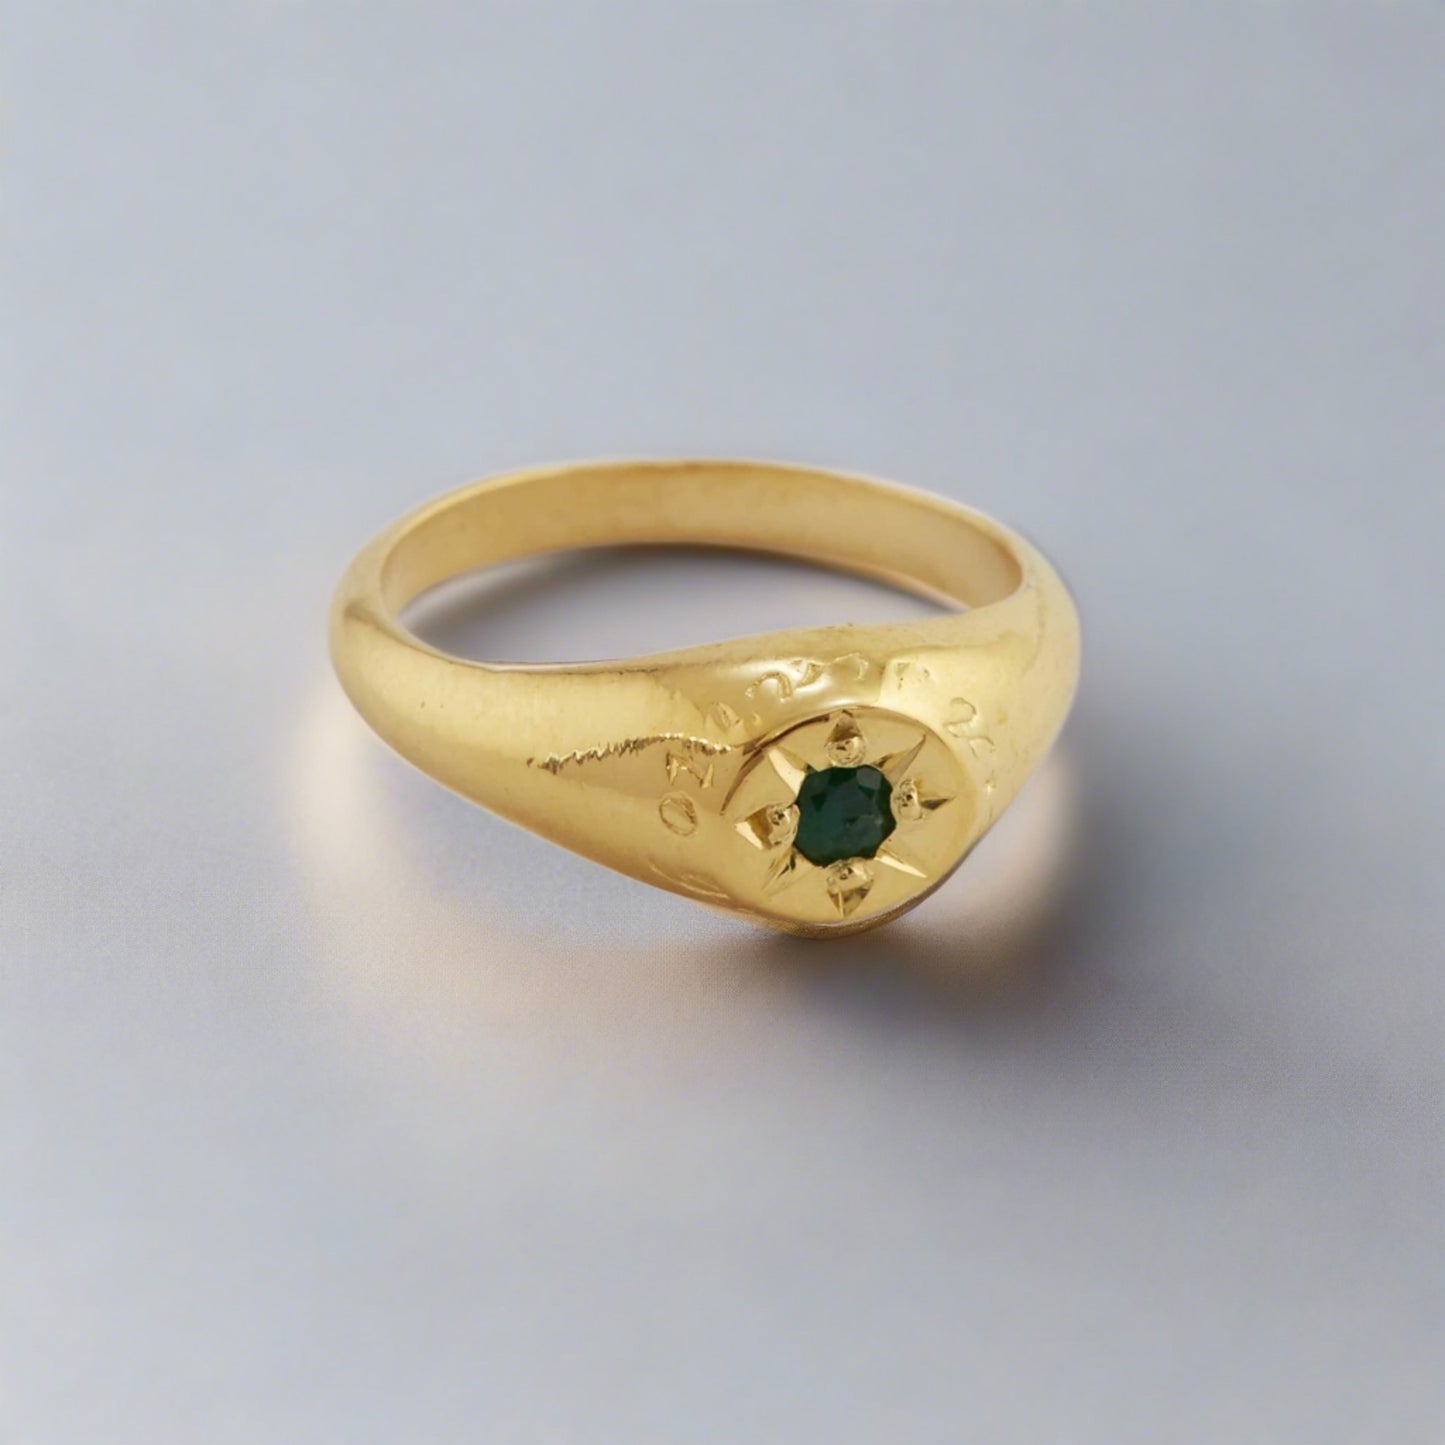 'A Star to Guide Me' Emerald Signet Ring